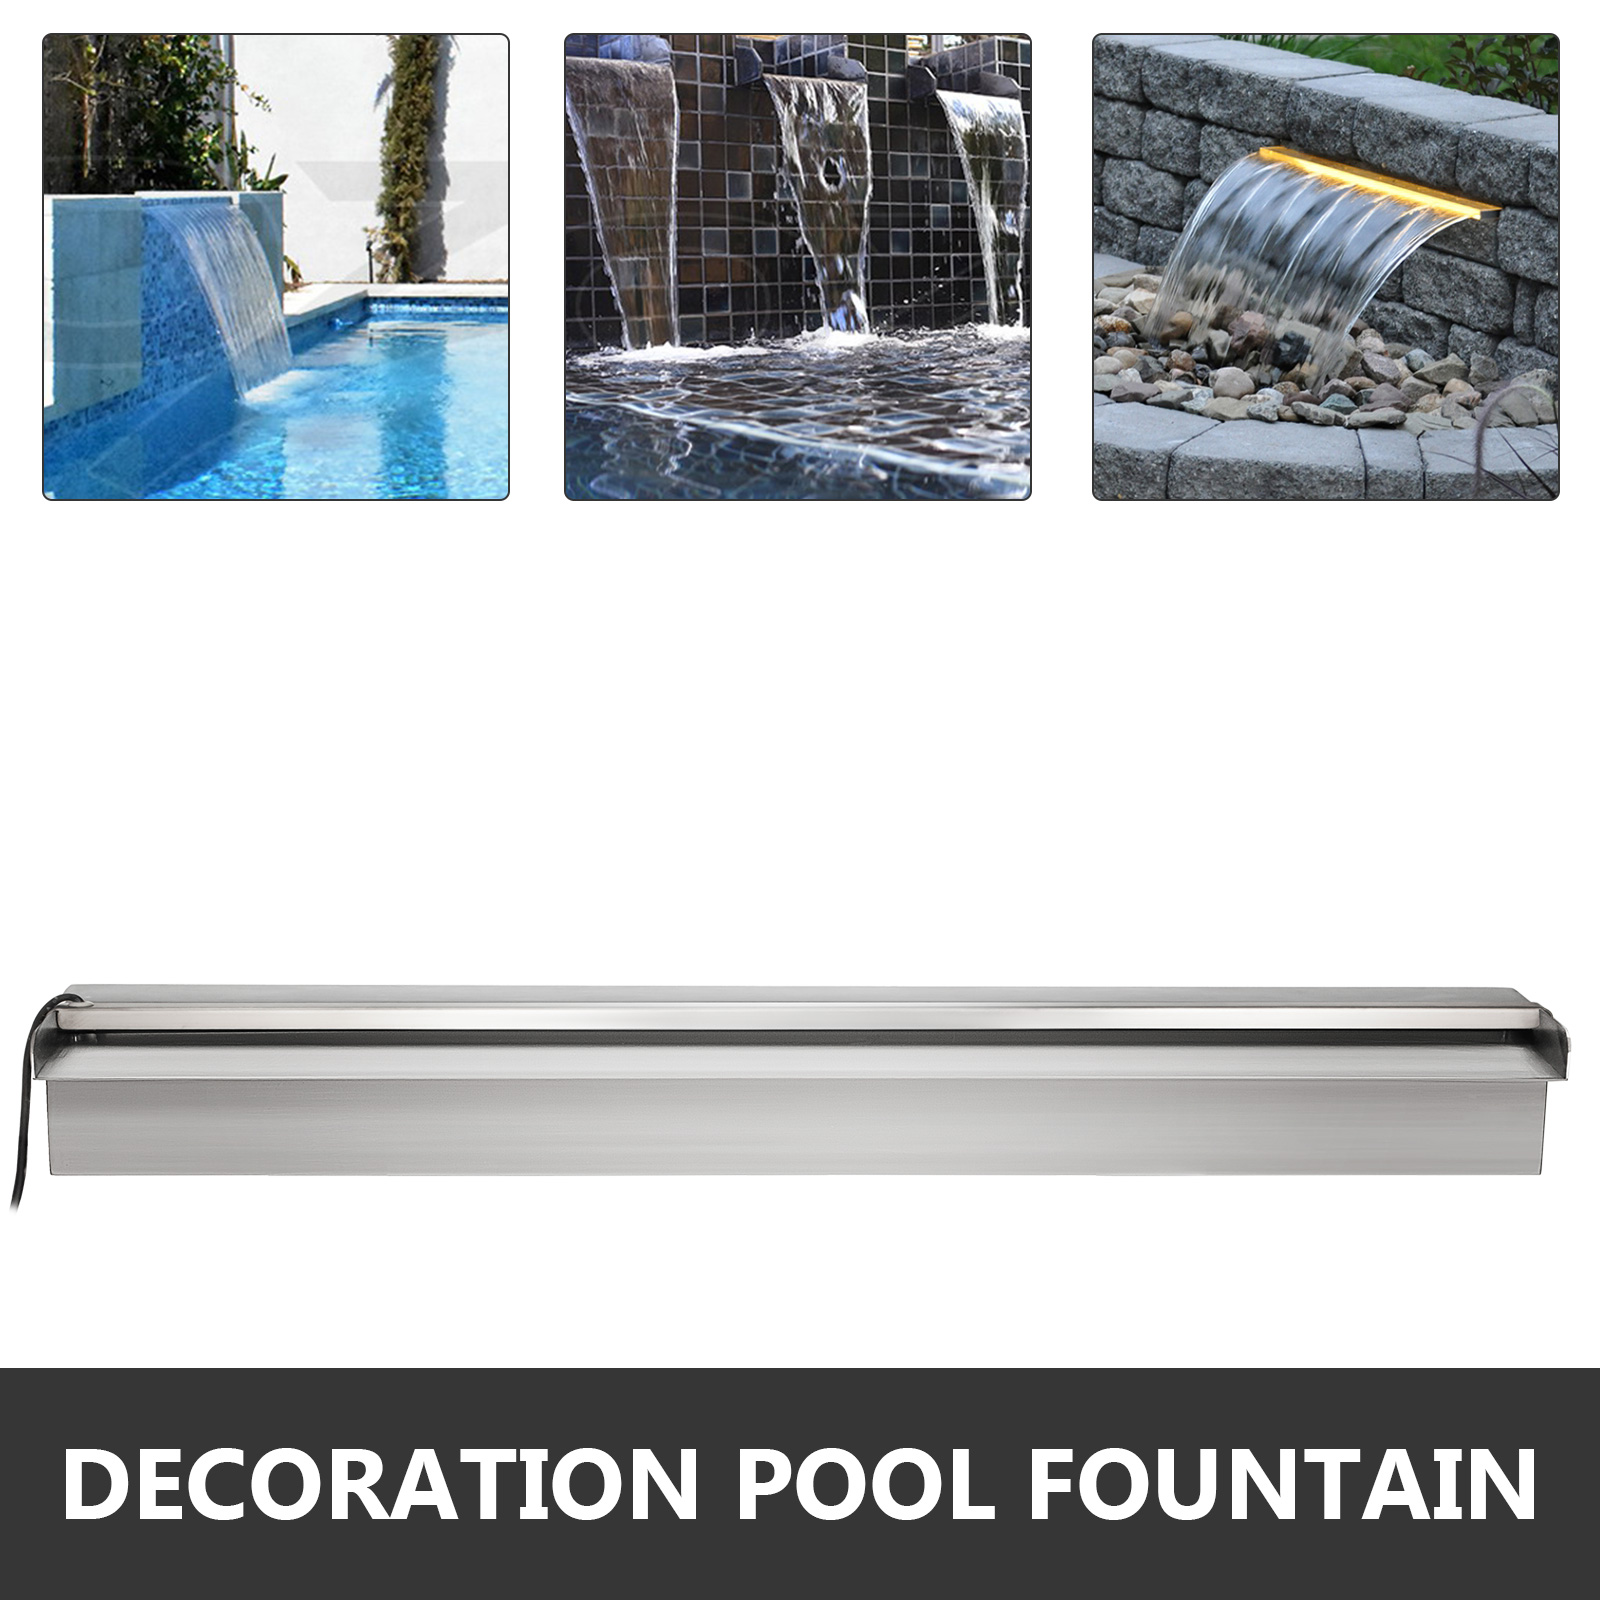 W x D x H Patiolife Pool Fountain Stainless Steel Pool Waterfall 47.2 x 4.5 x 3.1 with LED Strip Light Waterfall Spillway Rectangular Garden Outdoor 59.4 